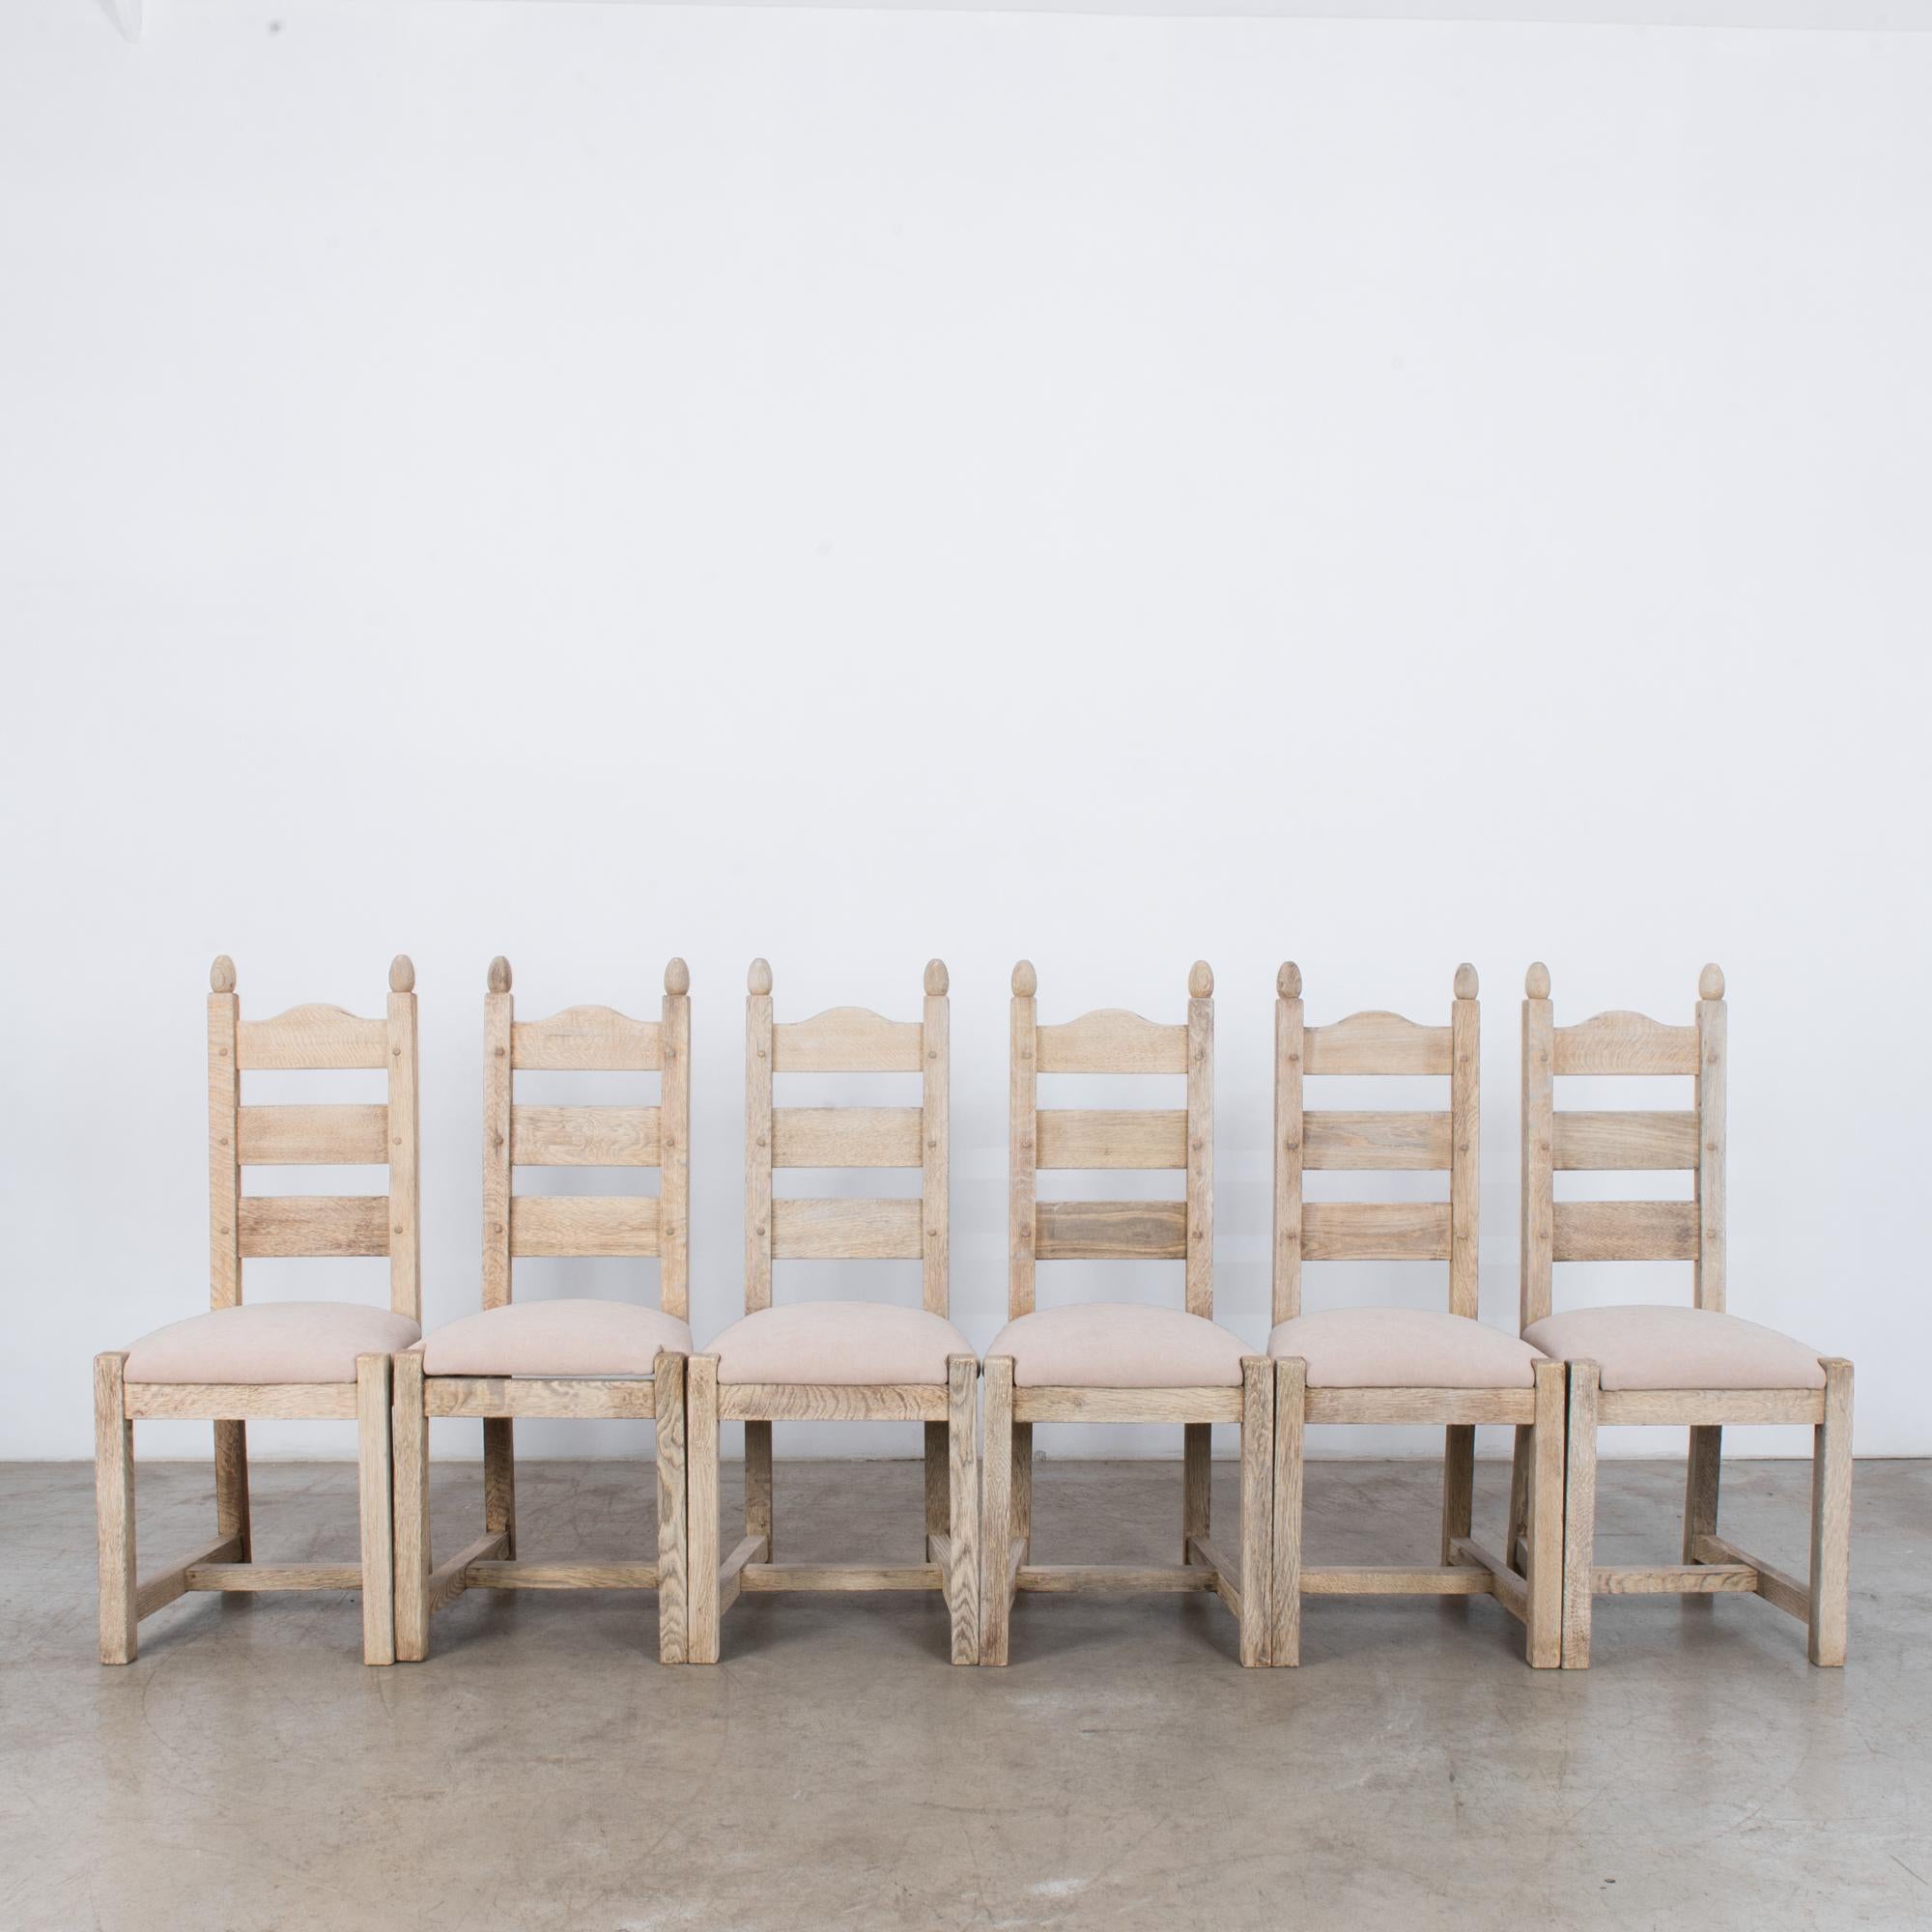 A set of six wooden dining chairs with upholstered seats from Belgium, circa 1970. A farmhouse shape, with four square legs joined by a strut, and a wooden backrest made of three slats. The seat is upholstered in a soft cream color. The light finish